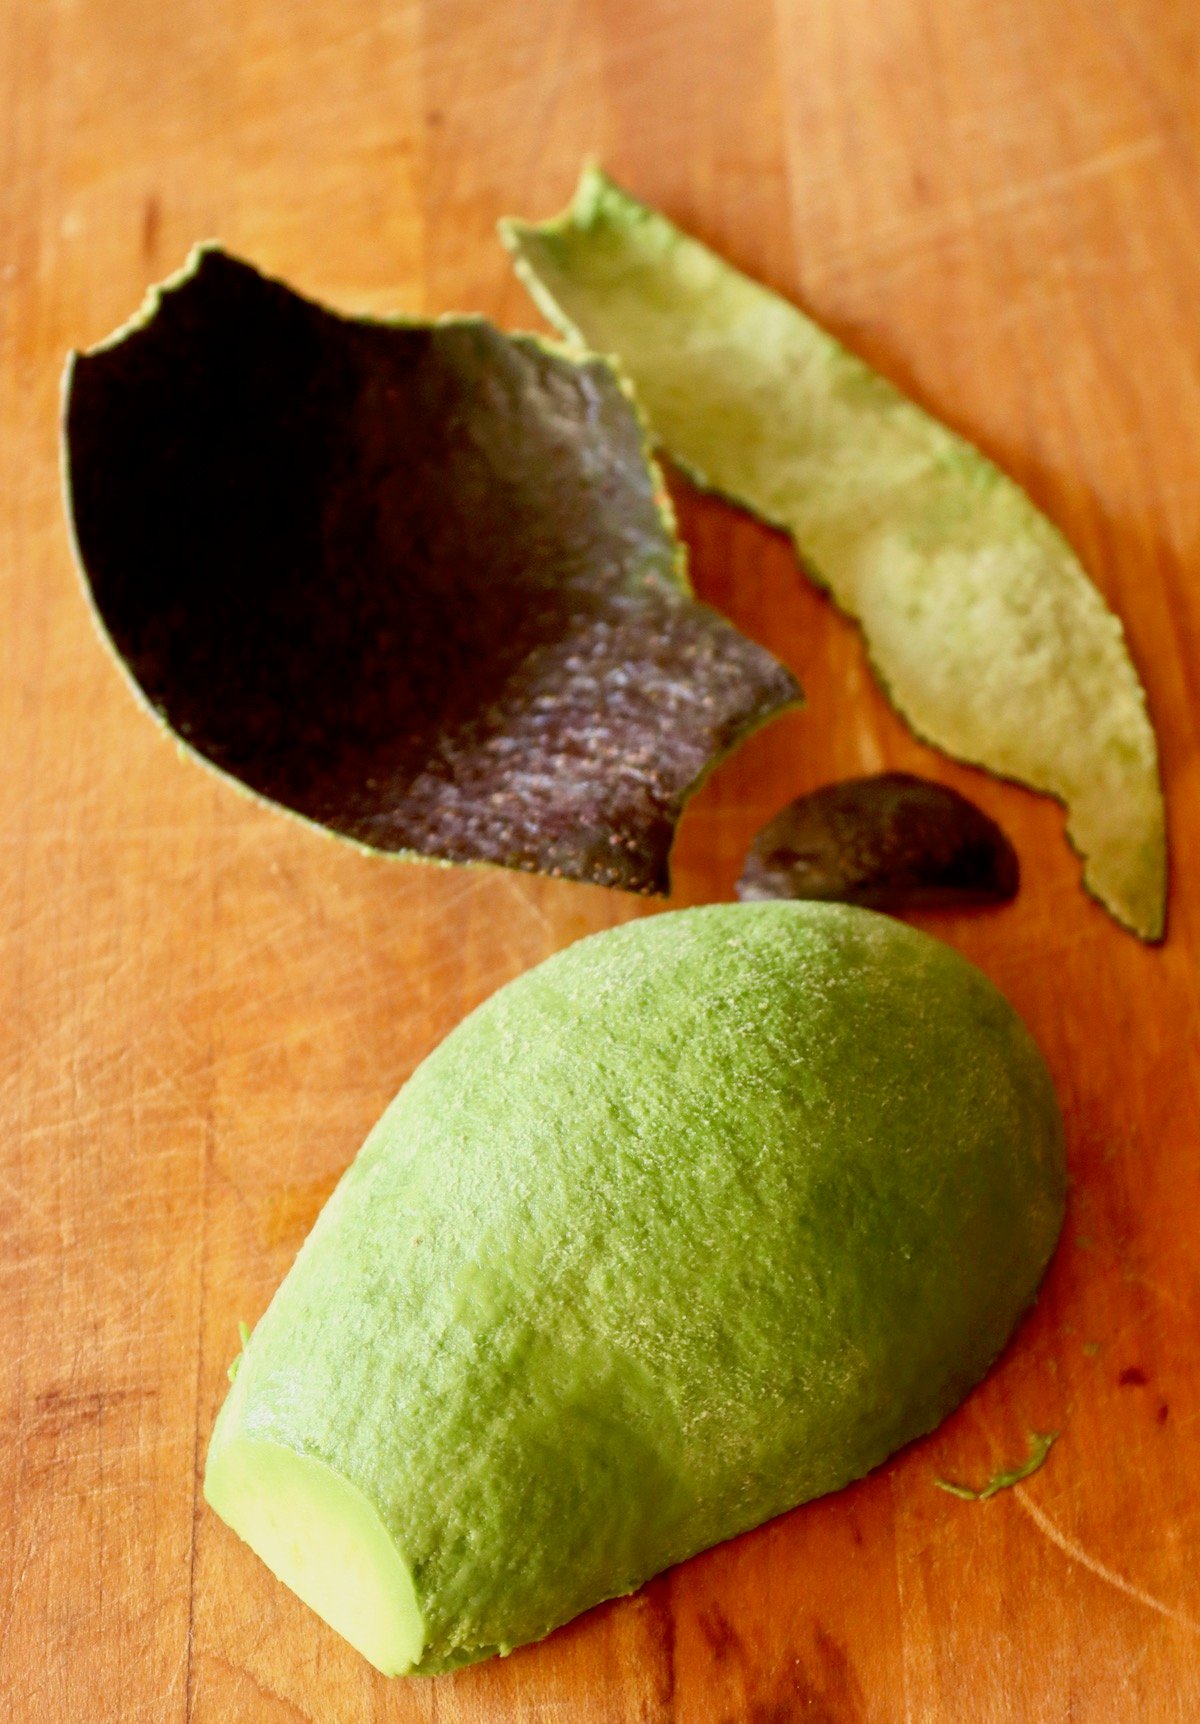 Avocado half, round side up, with skin peeled off.